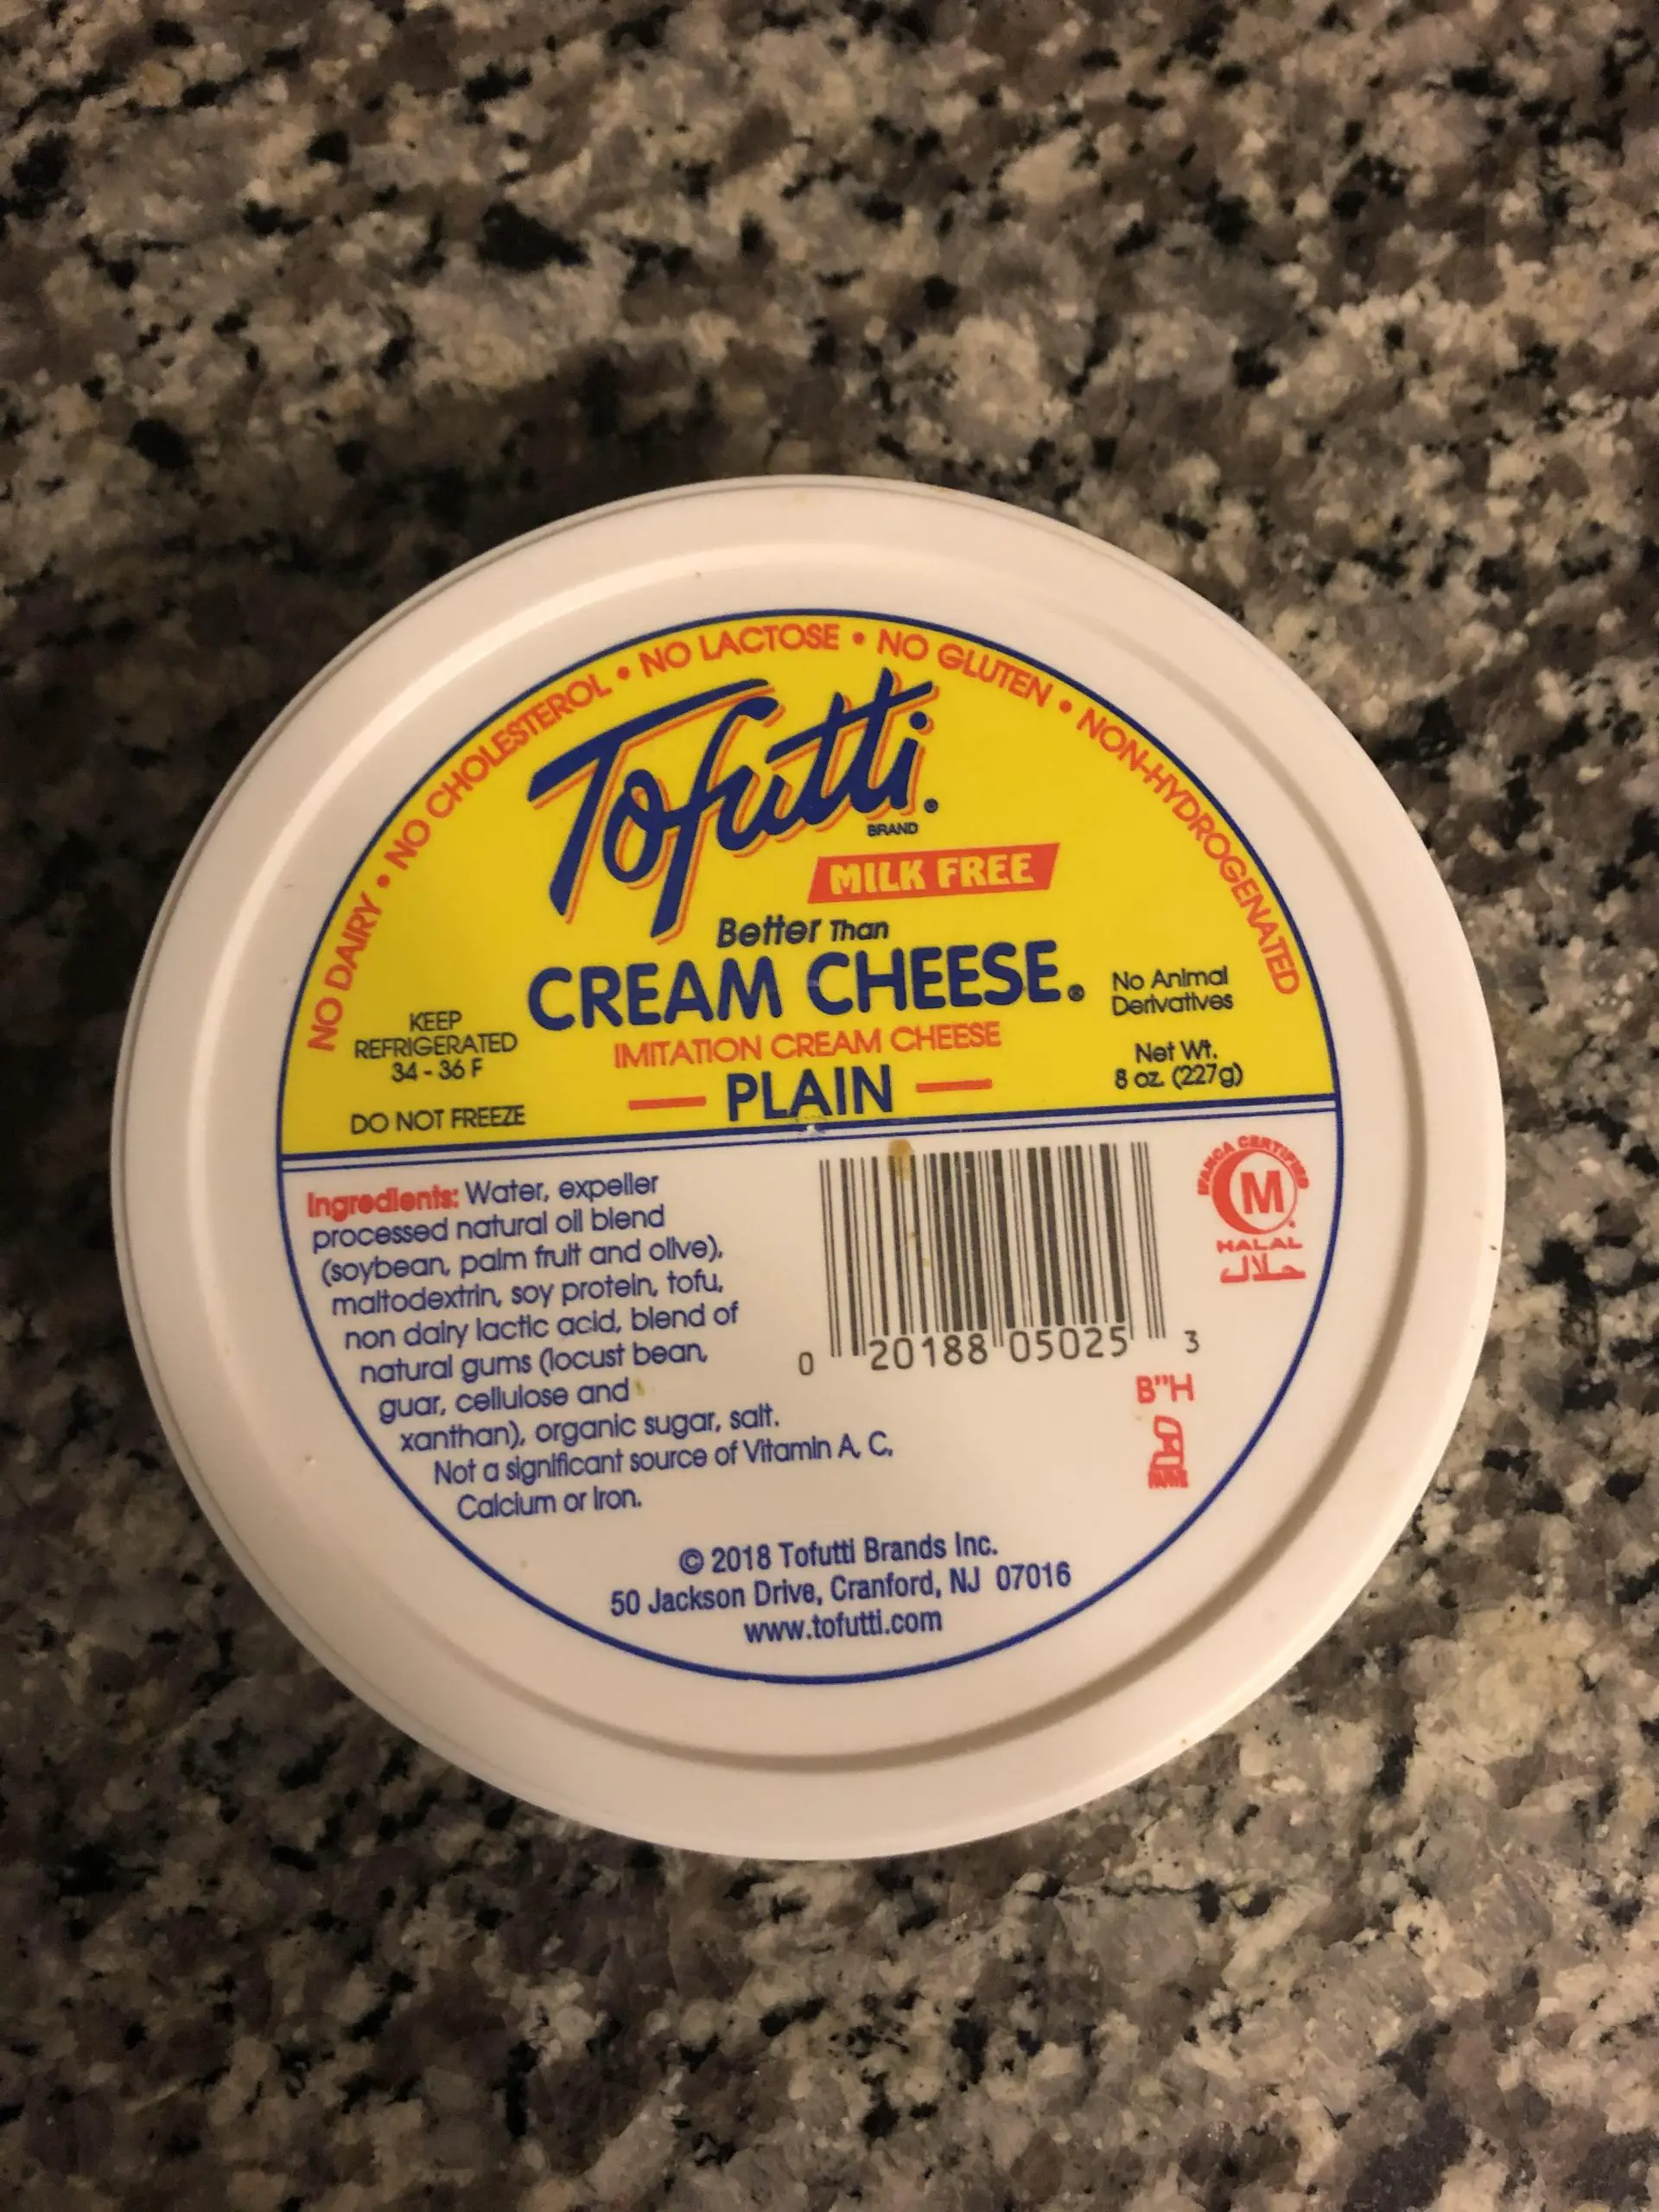 The best dairy free cream cheese on the market. Change my ...